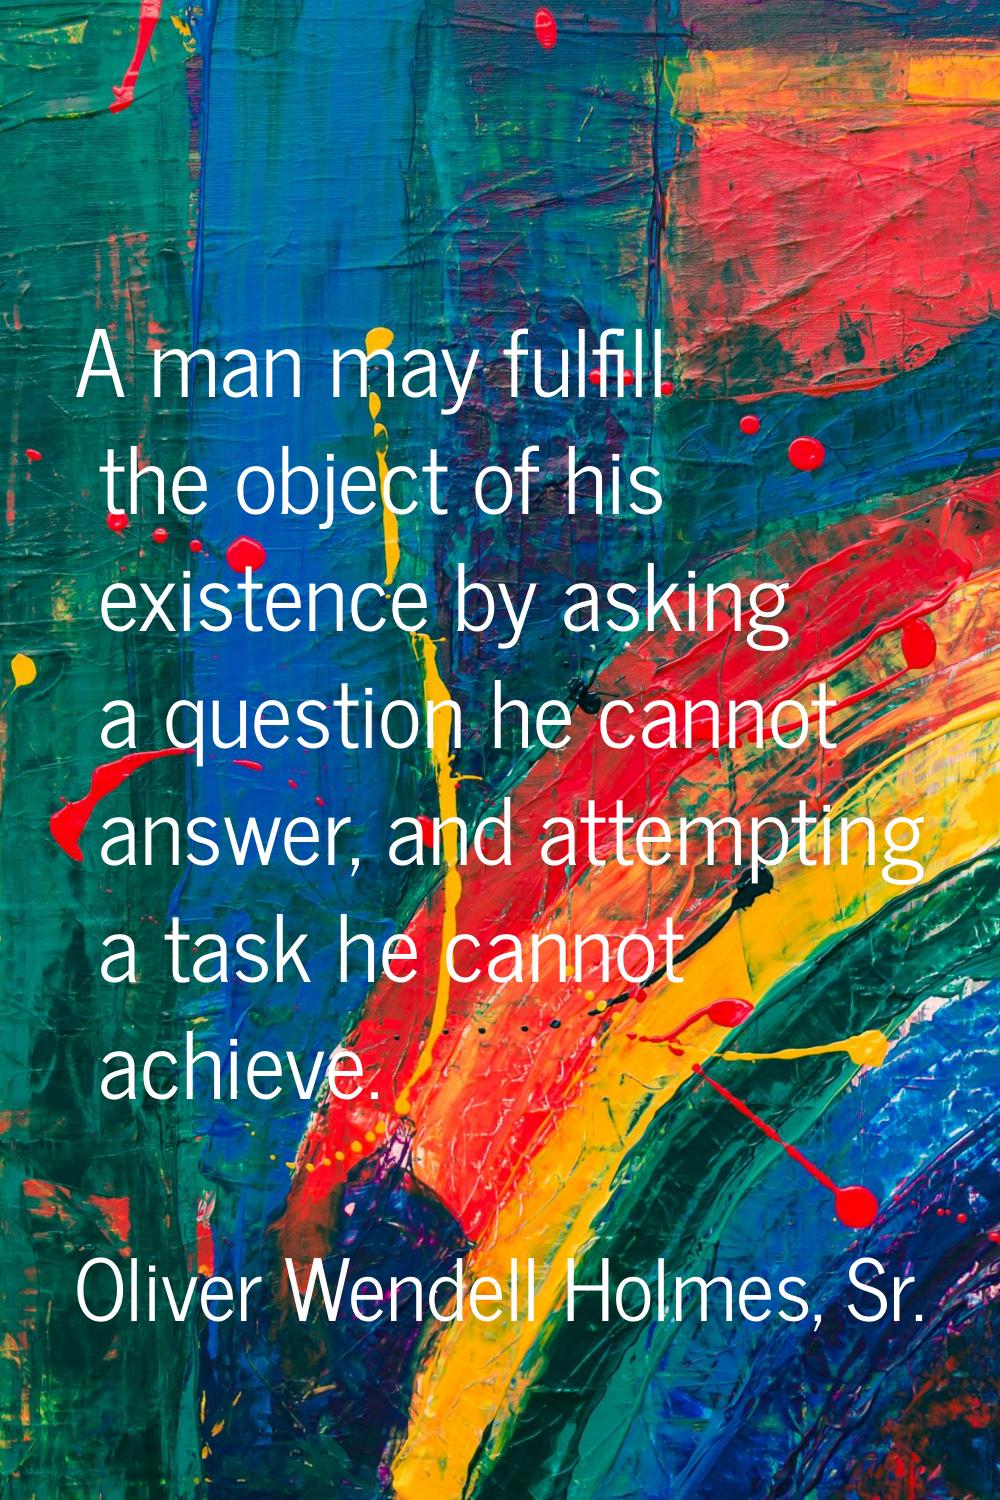 A man may fulfill the object of his existence by asking a question he cannot answer, and attempting